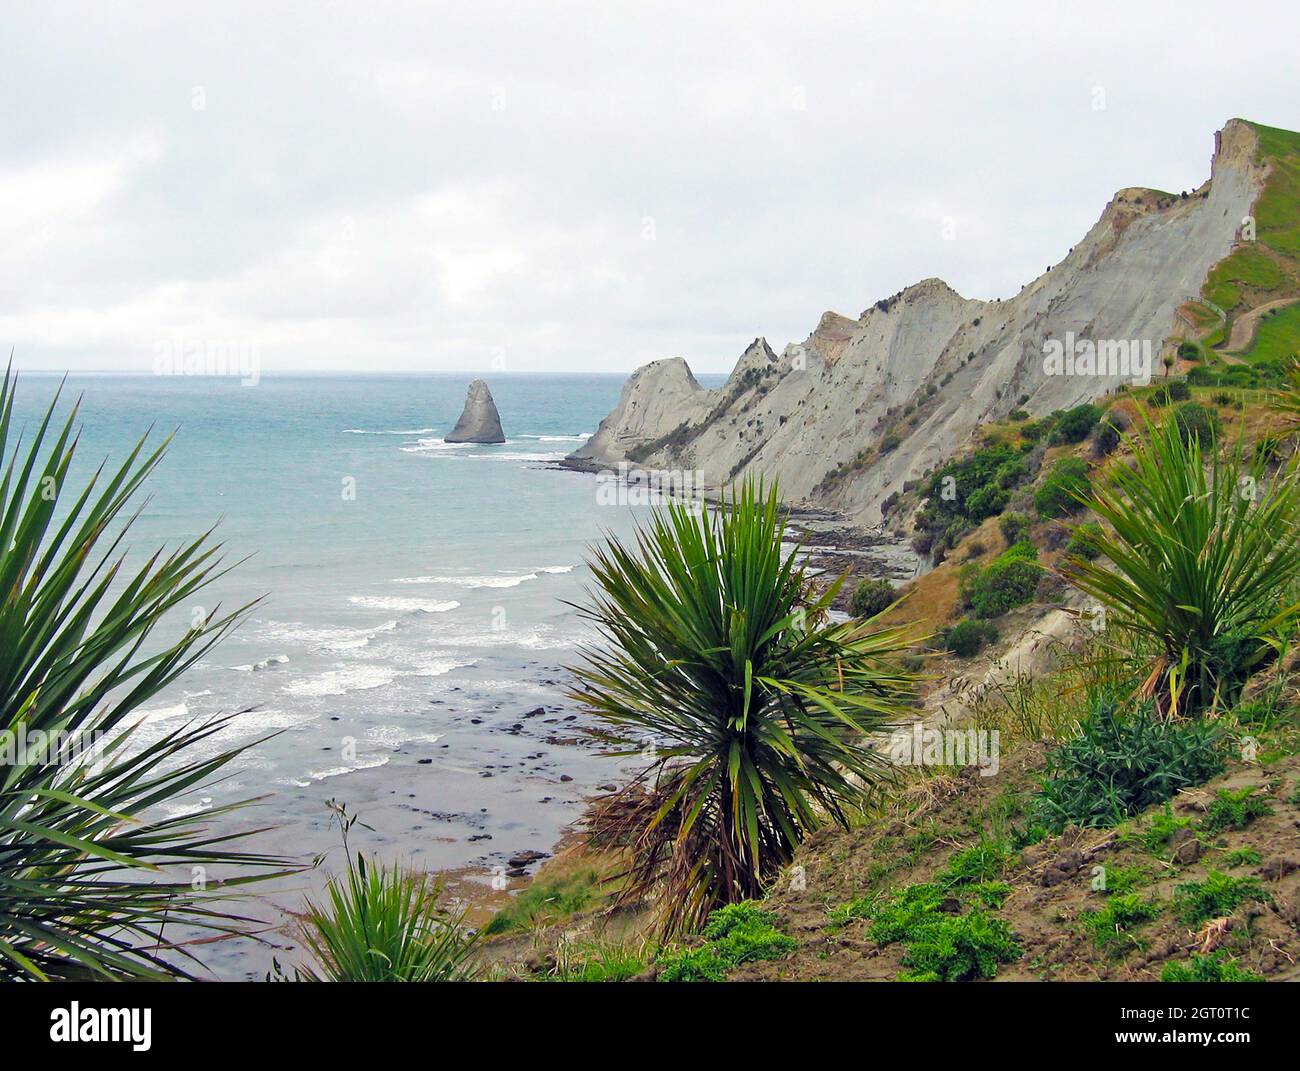 Cape Kidnappers in Hawkes Bay, North Island, New Zealand.  The cape was named after an attempt by local Māori to, according to Captain Cook, abduct a member of Cook's crew aboard the HMS Endeavour, during a landfall there on 15 October 1769. Stock Photo